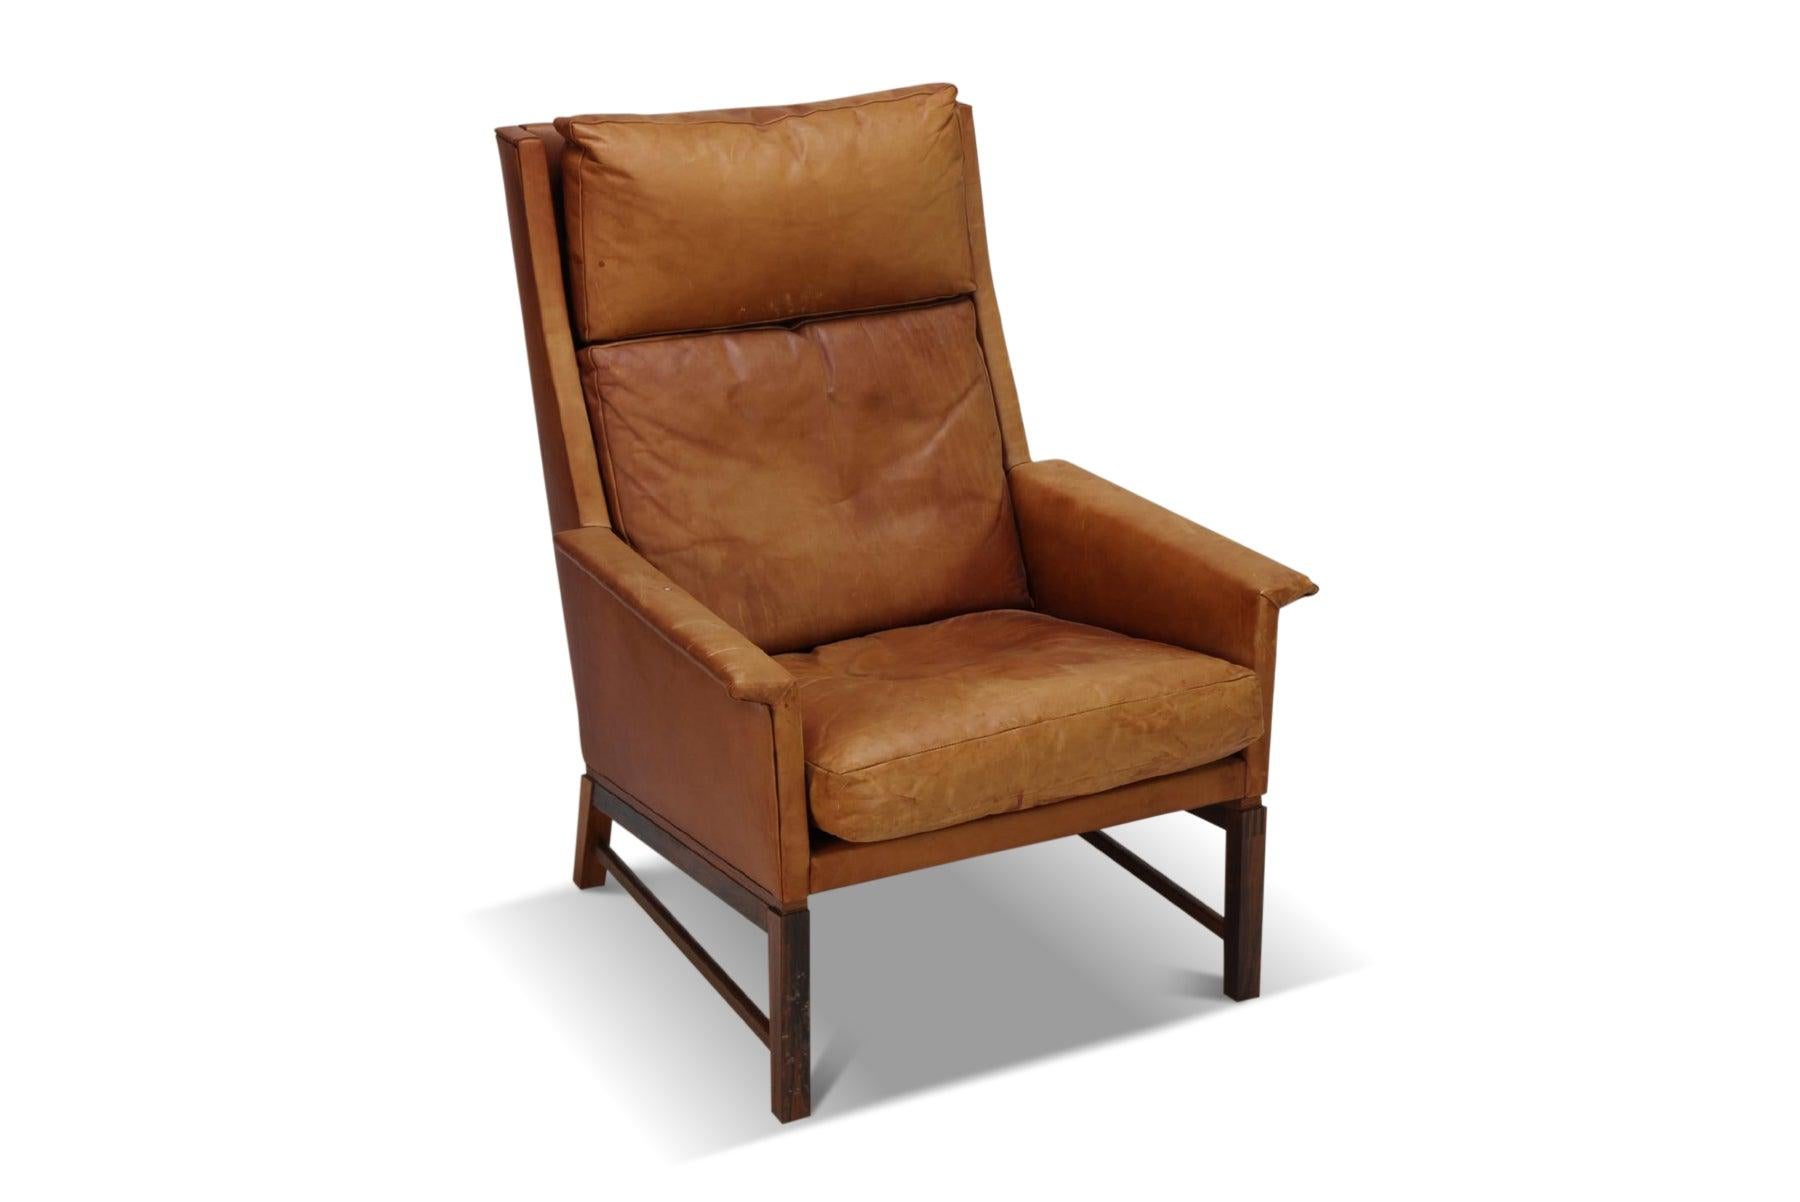 20th Century Highback Lounge Chair in Cognac Leather by Søborg Møbler